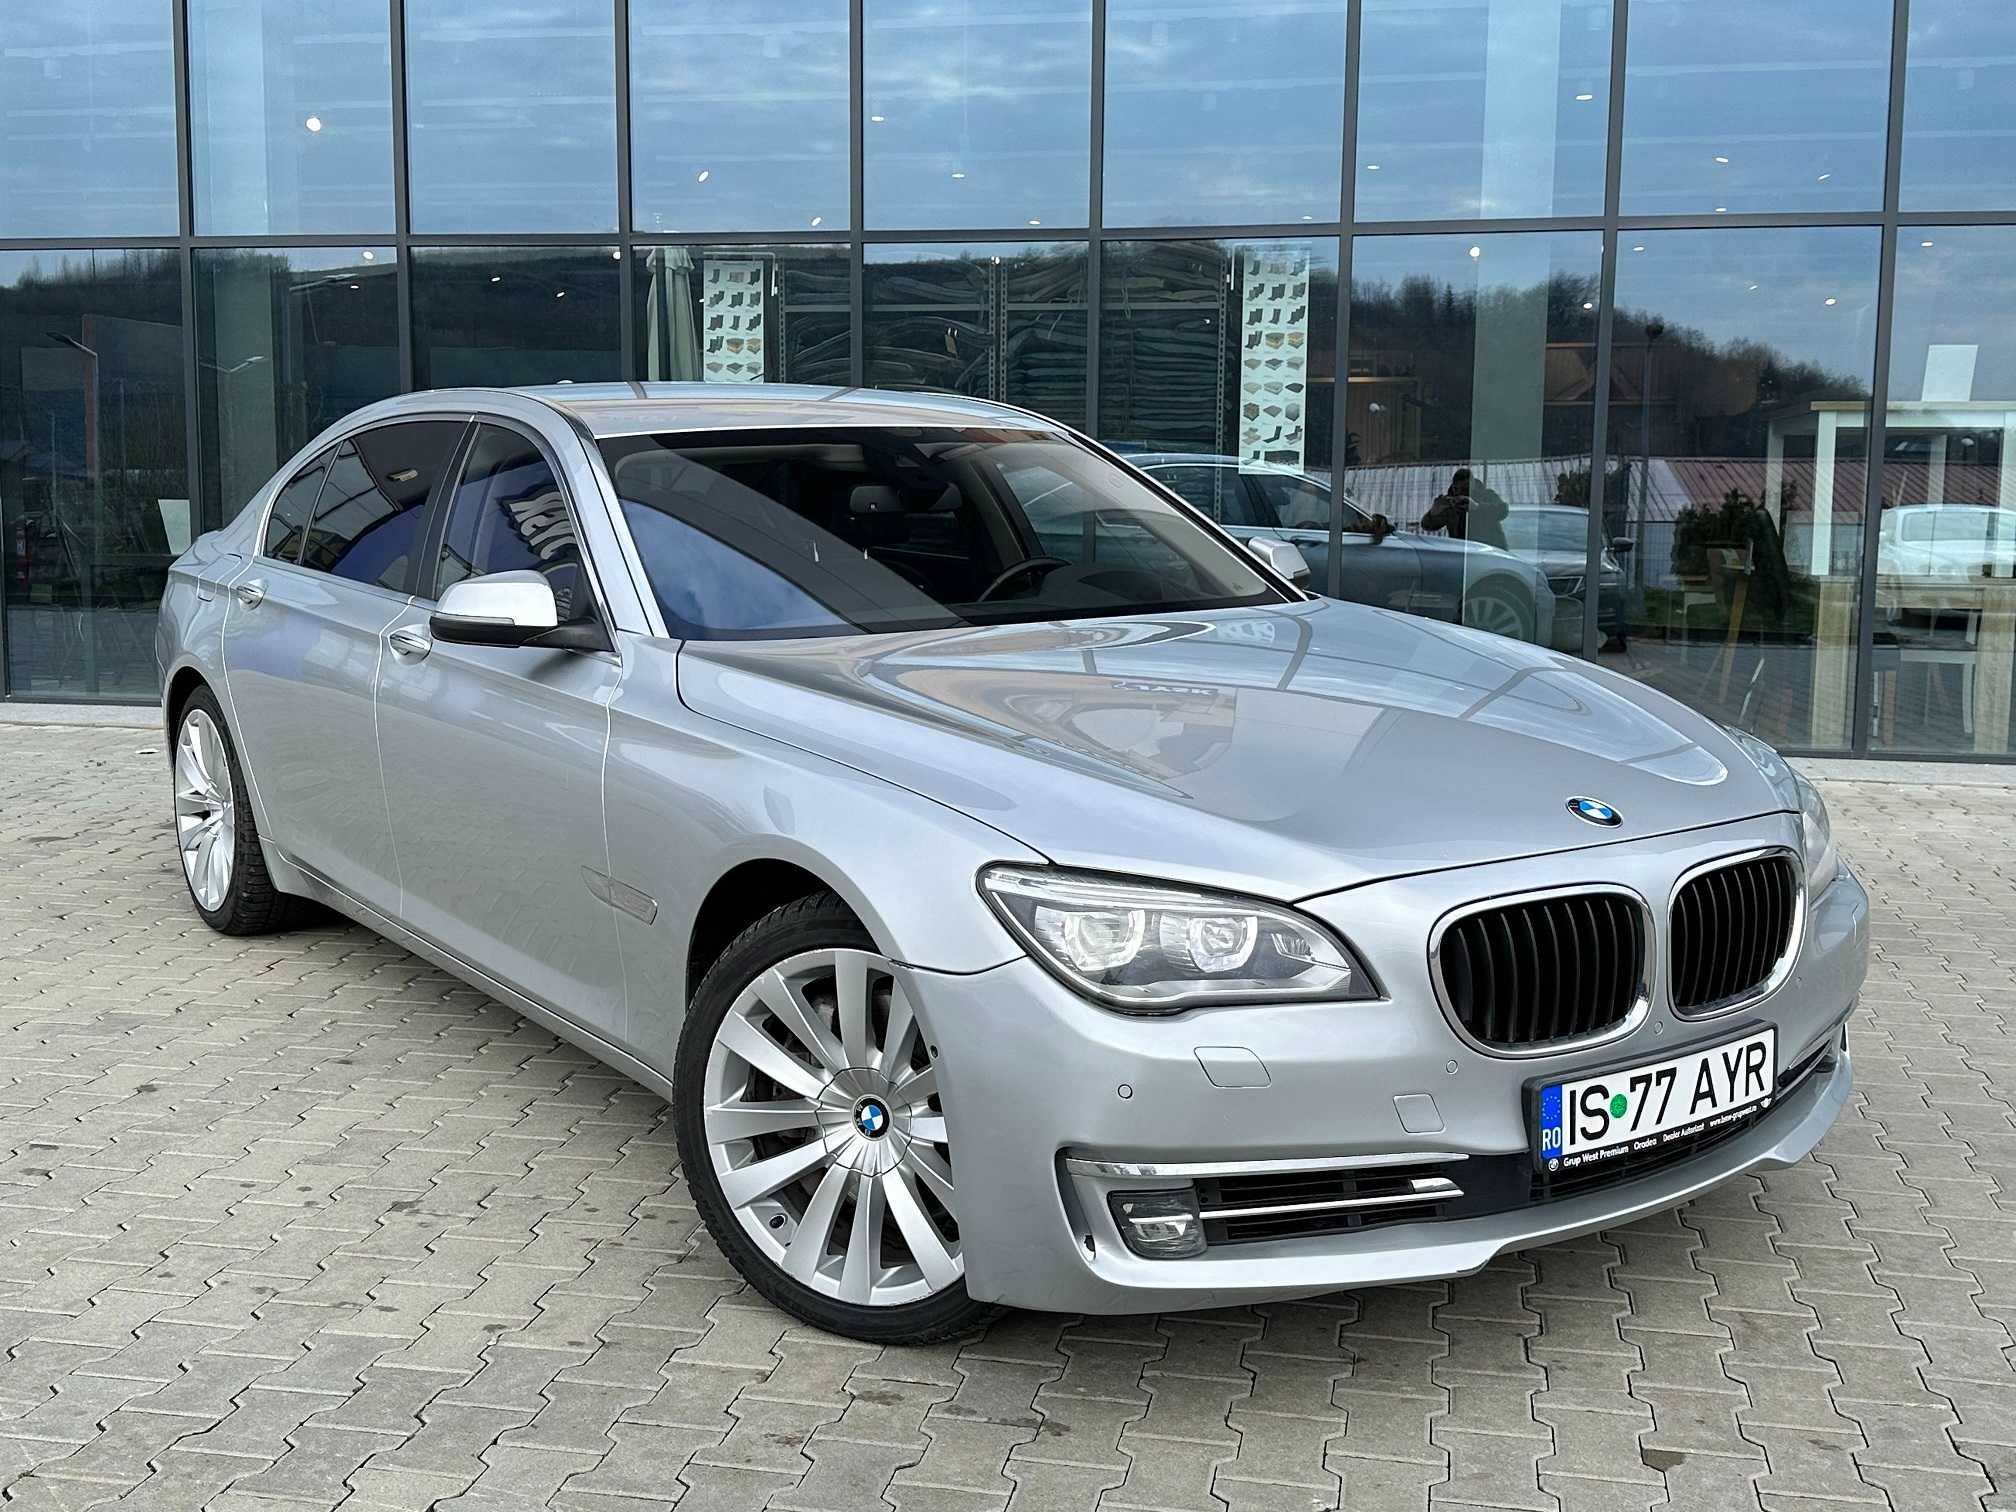 BMW 750 Ld x-drive 2013 facelift 4 butoane accept variante !!!